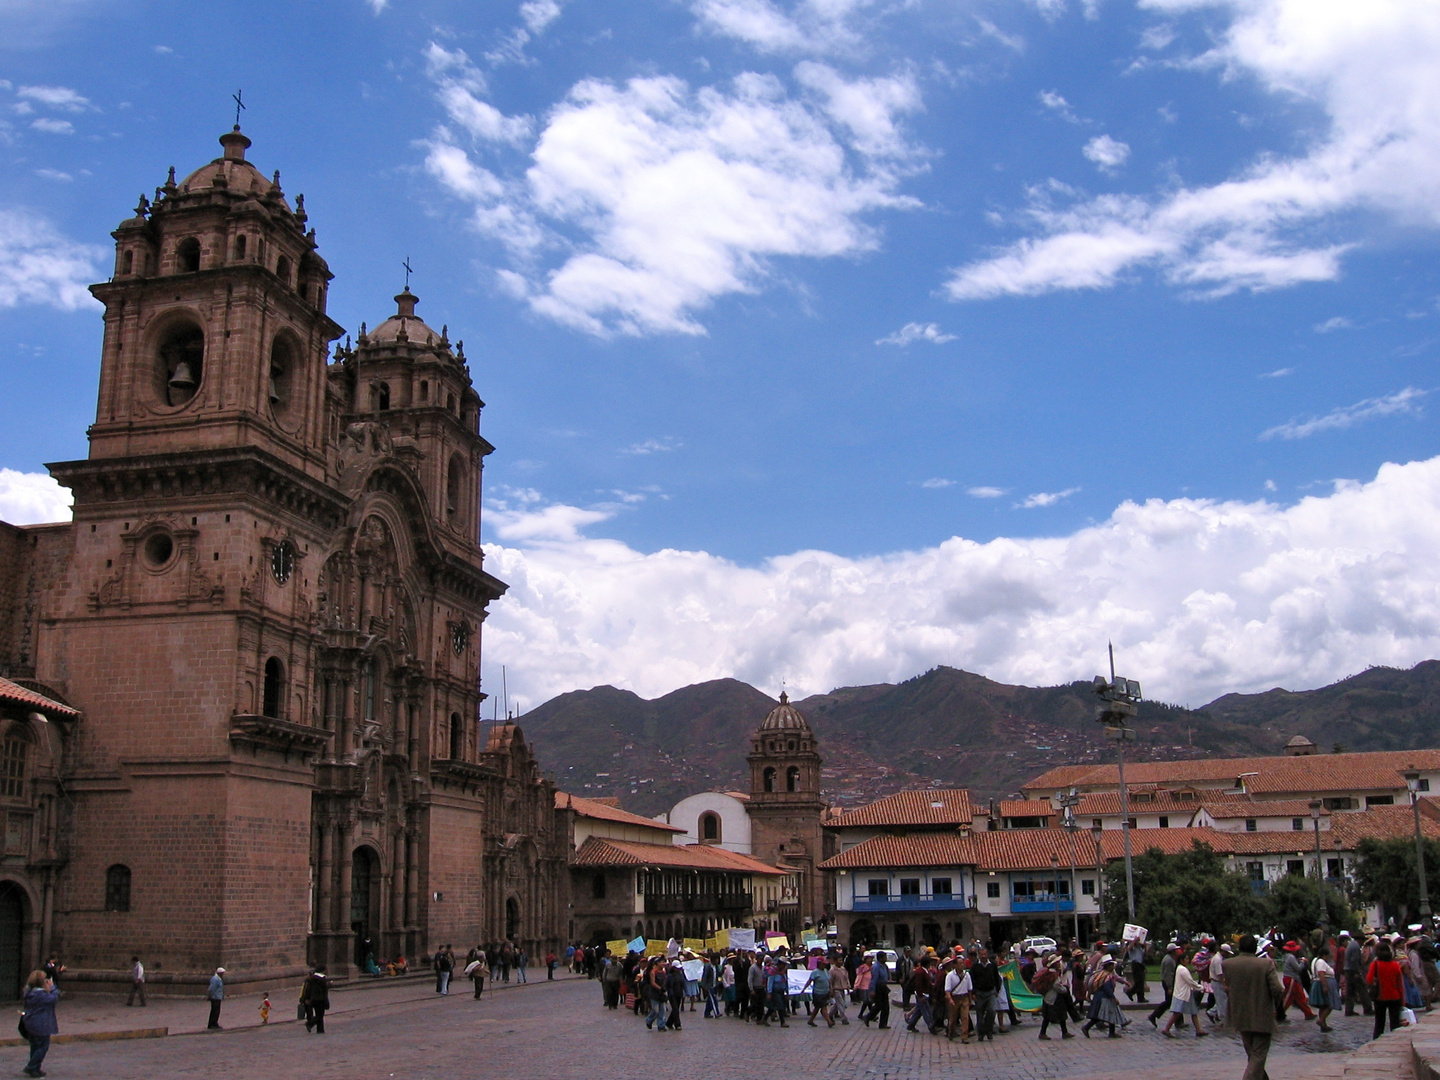 Demonstration in Cusco Square